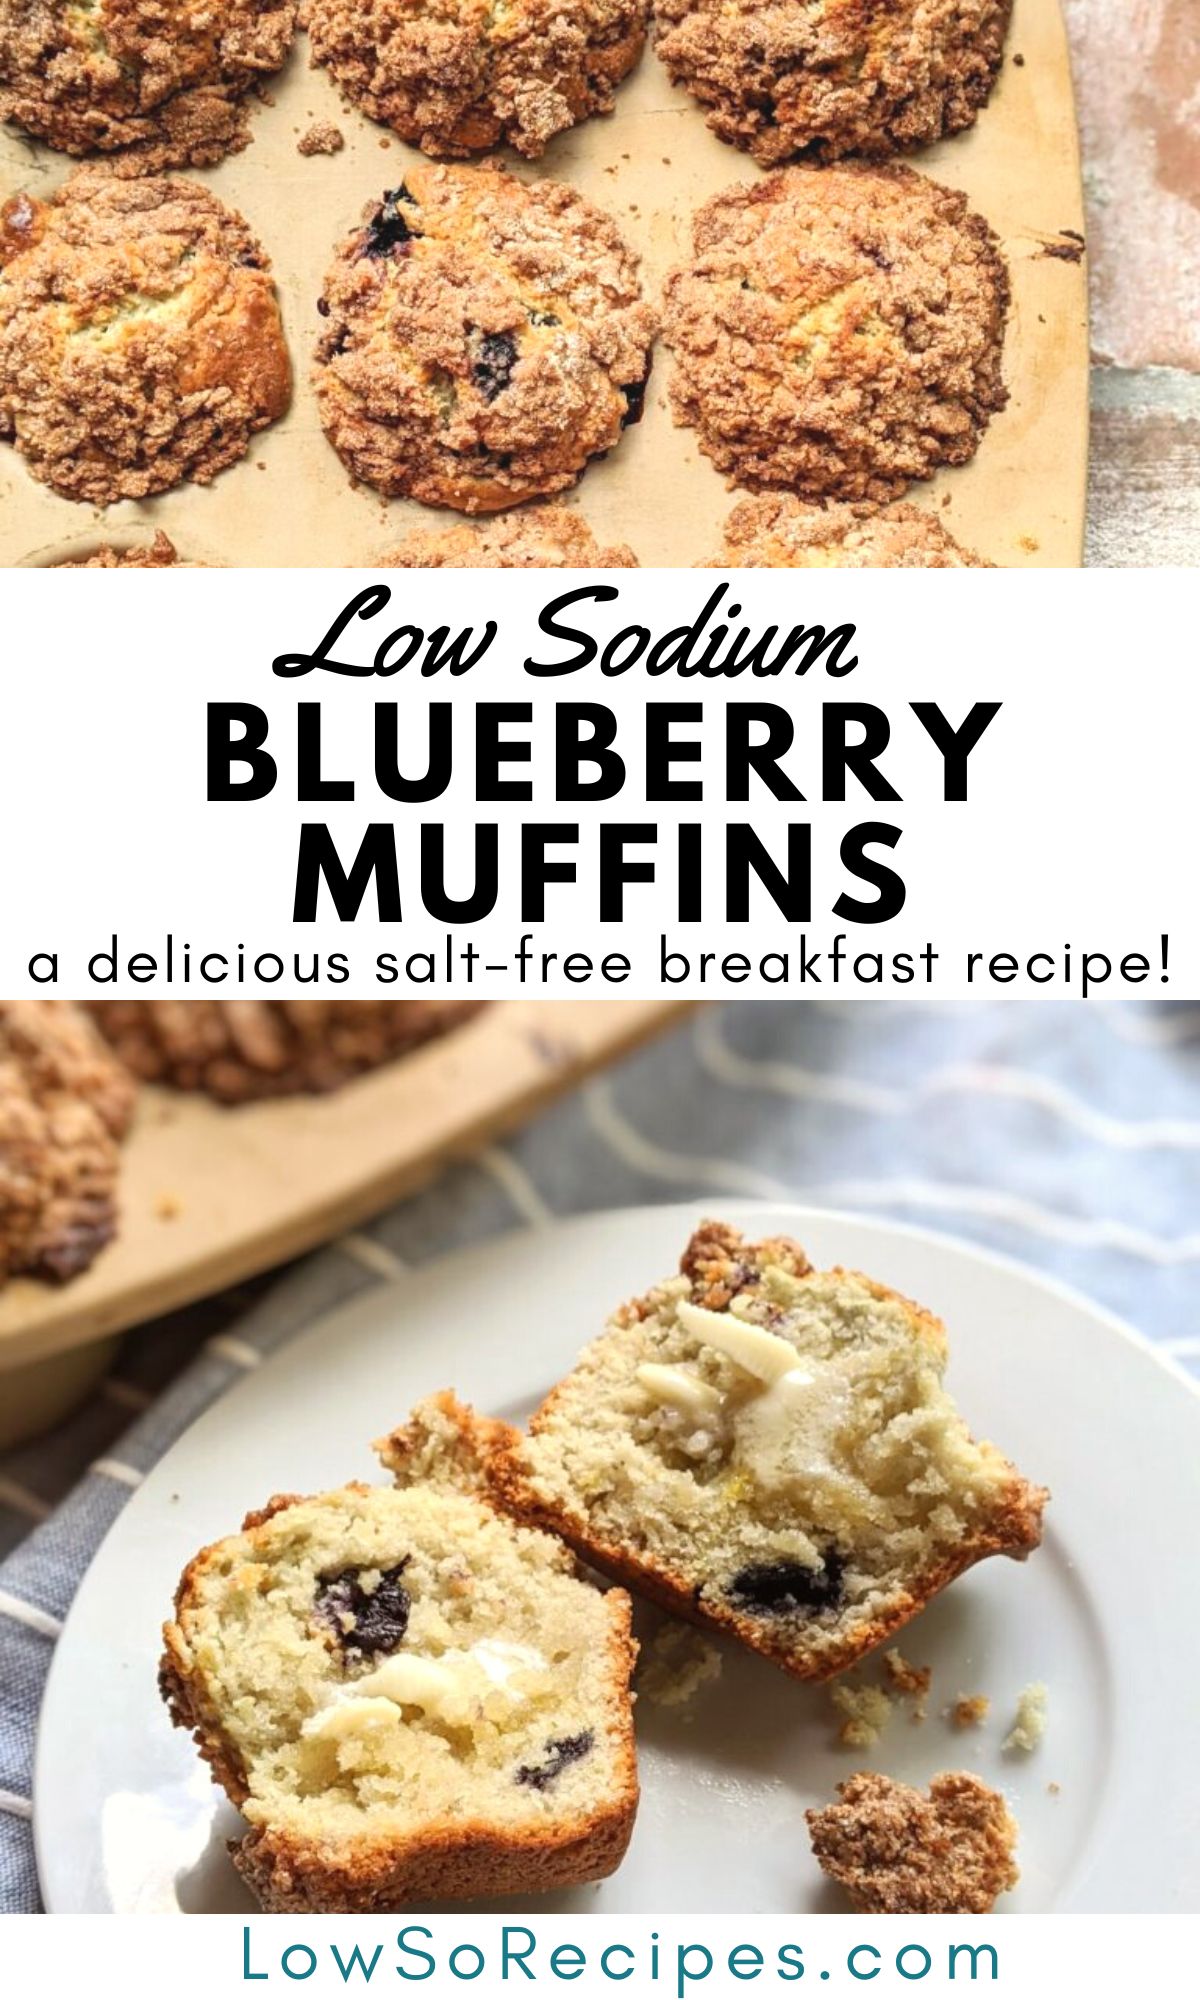 low sodium blueberry muffins recipe healthy low sodium muffins with fruit and eggs unsalted butter in baking muffins recipes